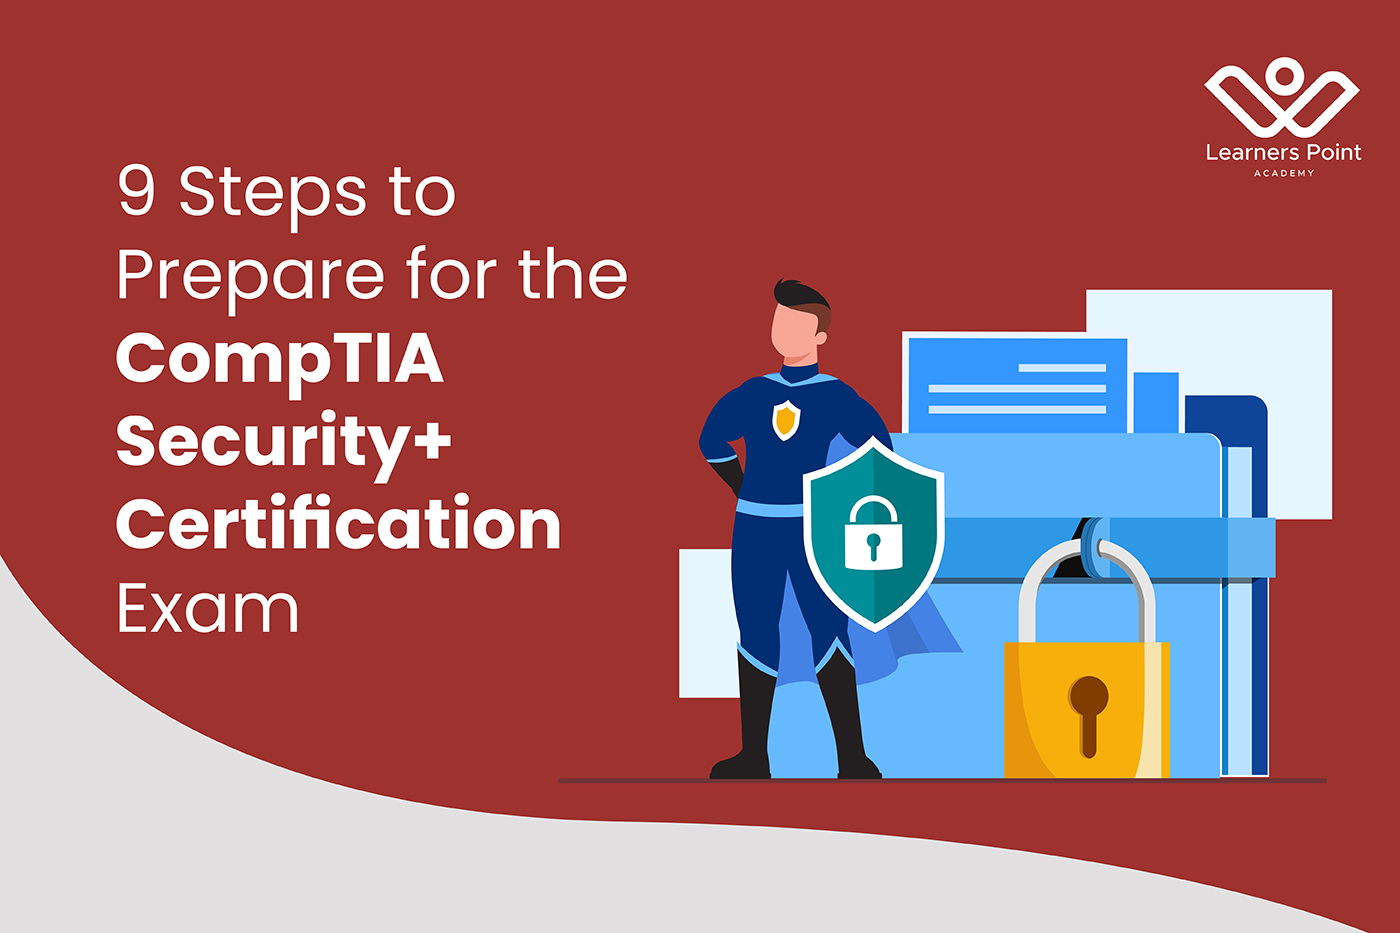 9 Steps to Prepare for the CompTIA Security+ Certification Exam